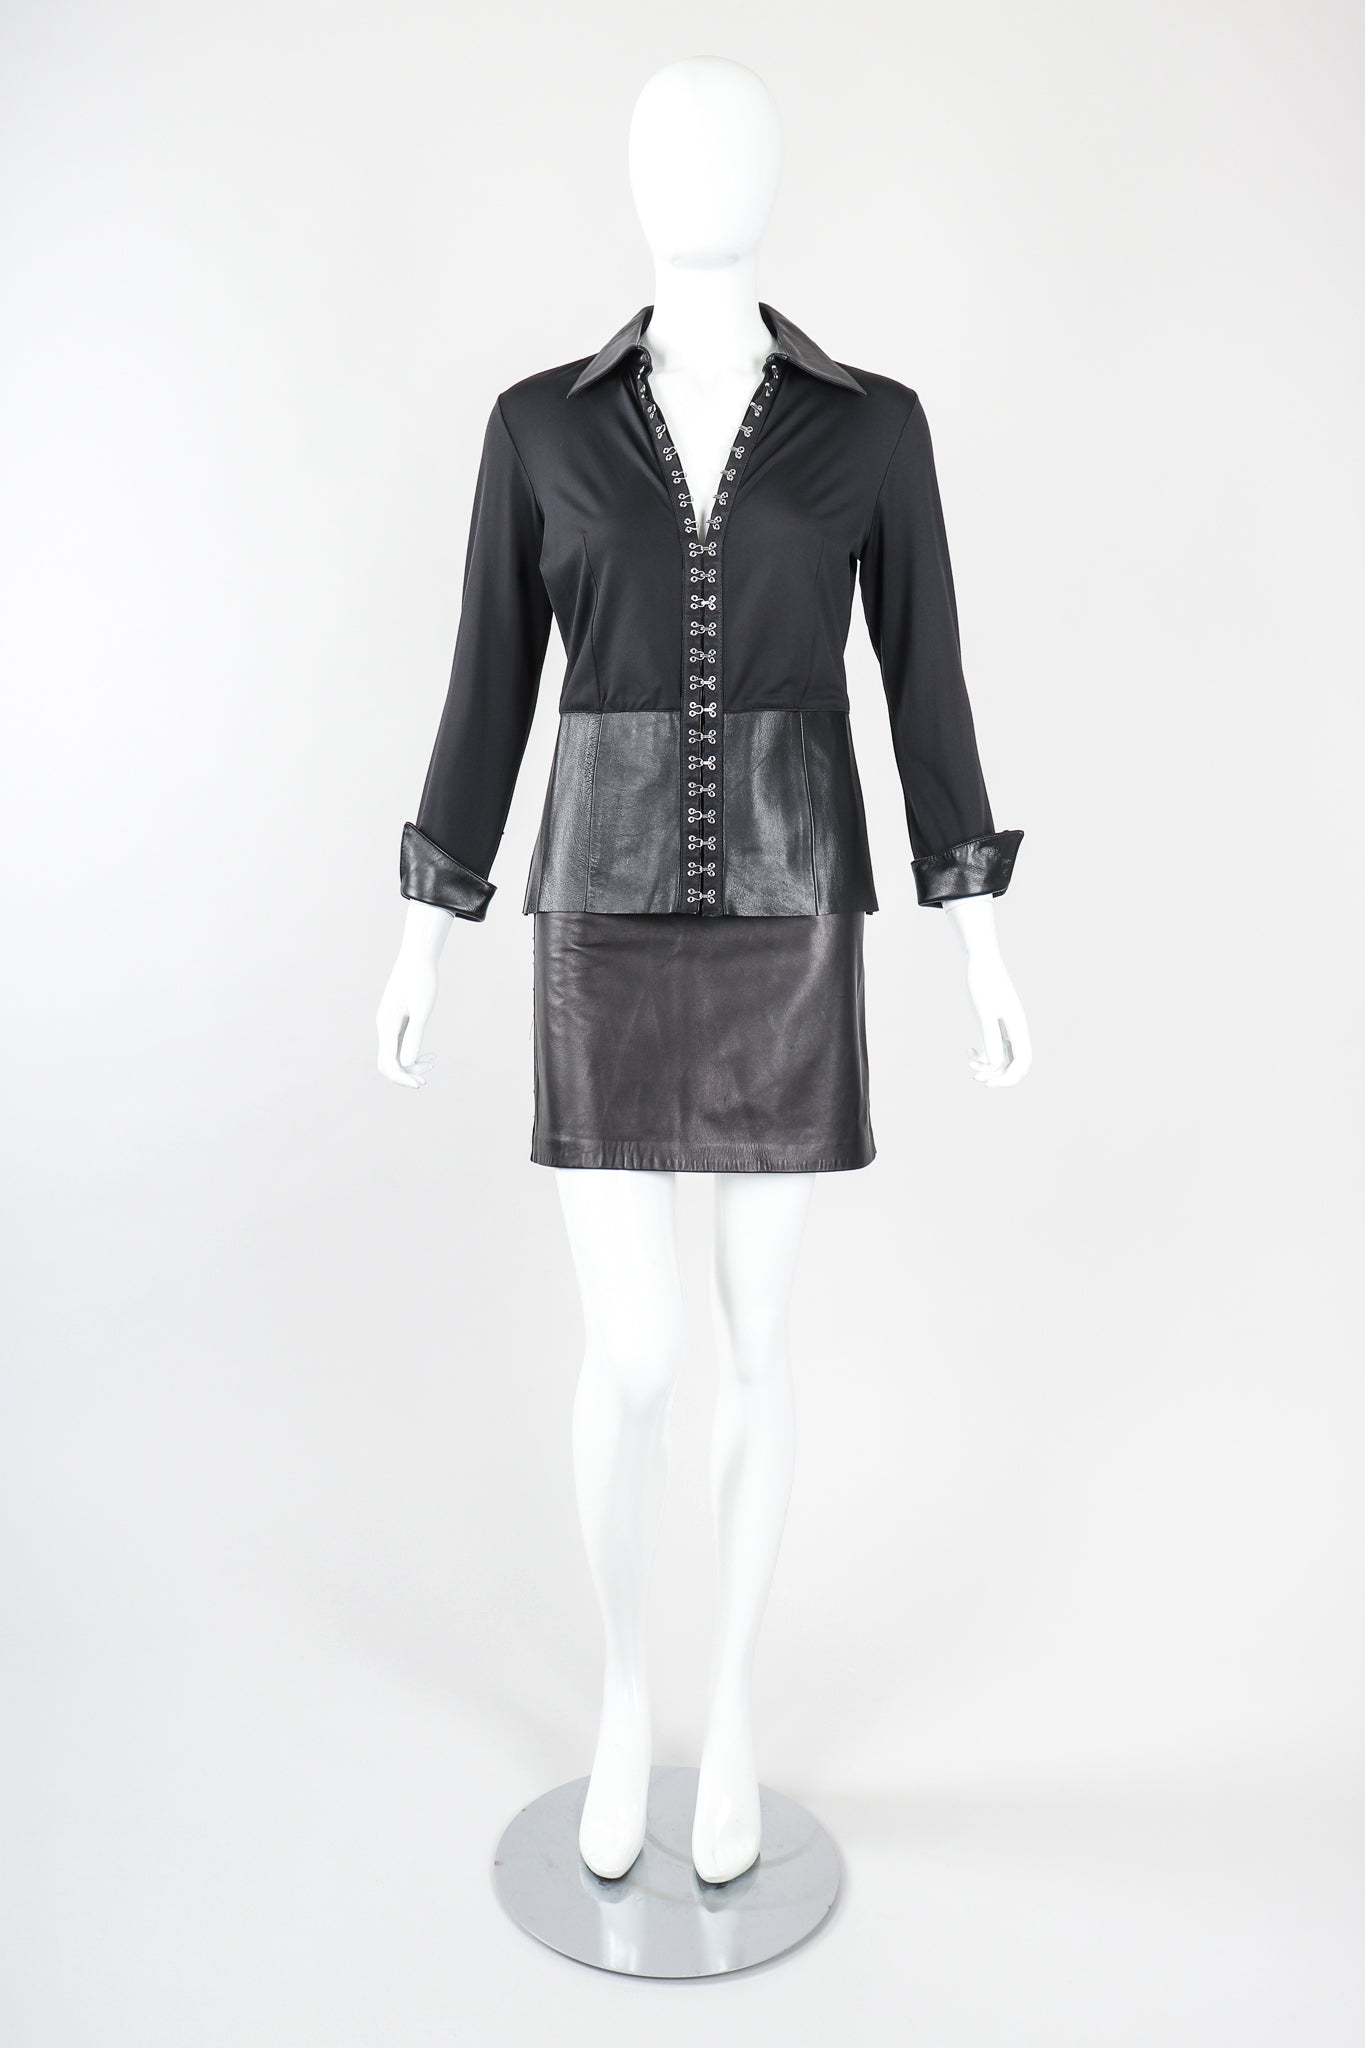 Recess Designer Consignment Vintage Isabel Leather Hooked Top & Skirt Set Outfit Ensemble Los Angeles Resale